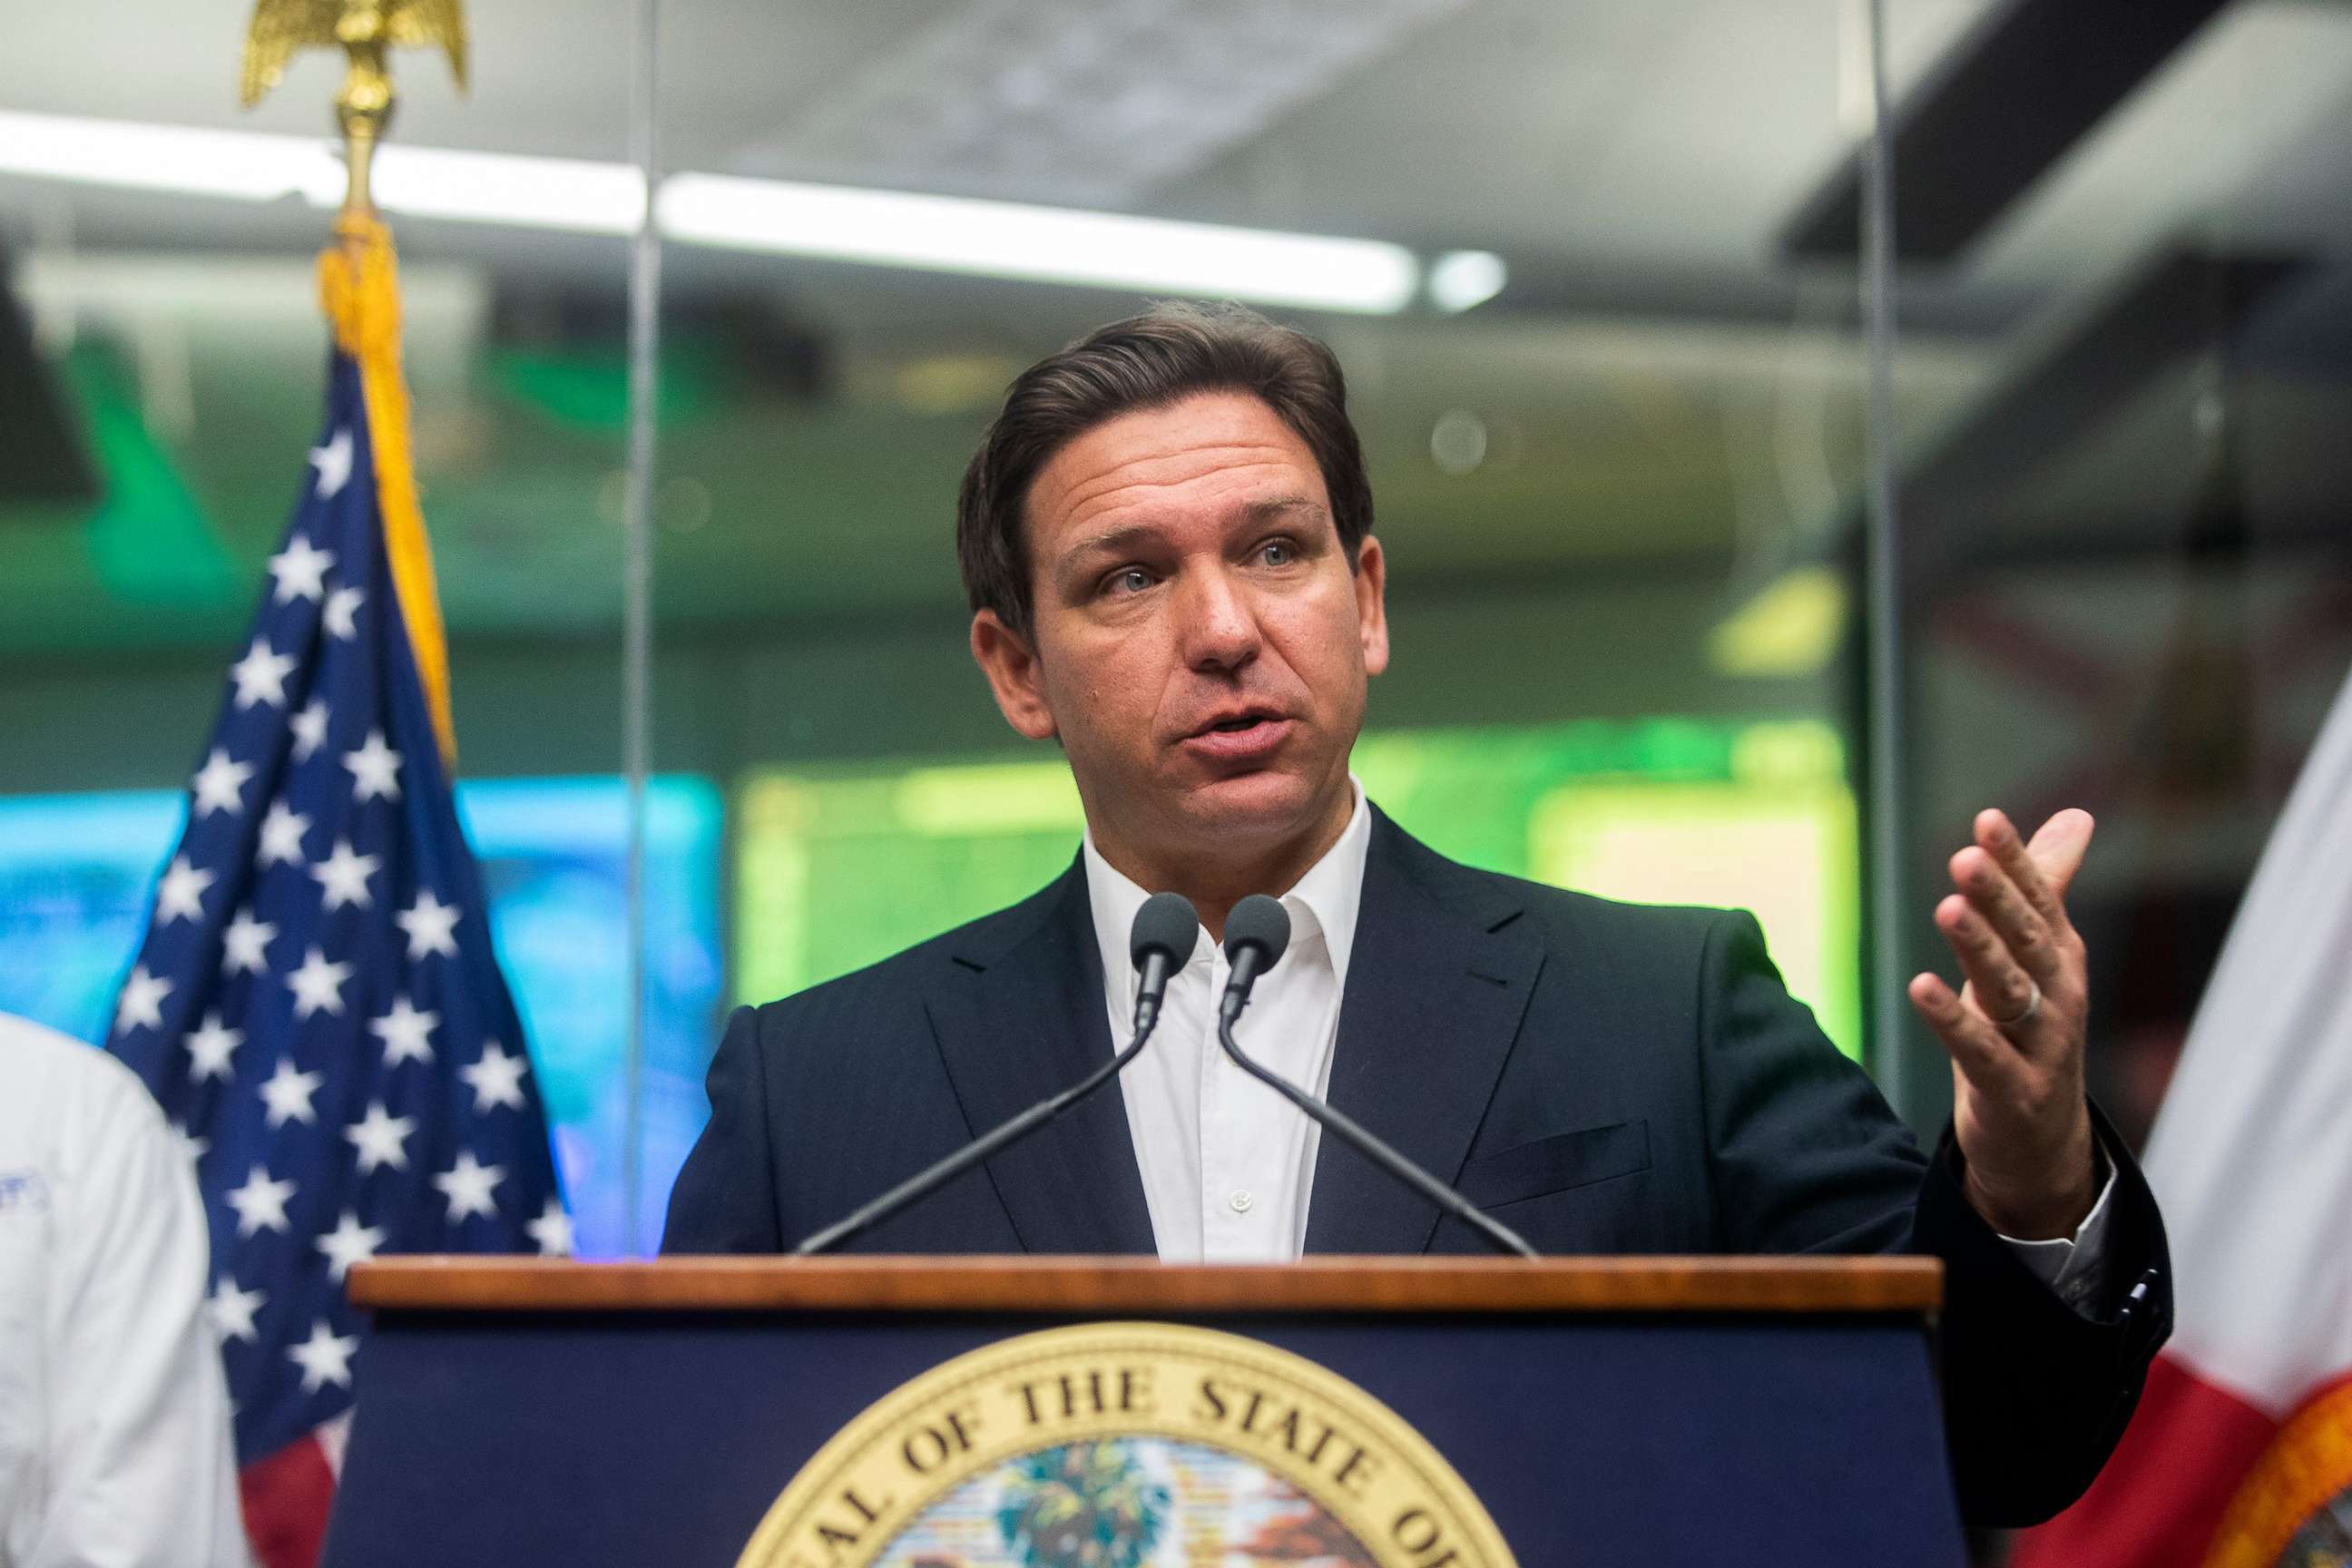 PHOTO: Florida Gov. Ron DeSantis speaks at a press conference about updates and preparations for Hurricane Ian at the State Emergency Operations Center  in Tallahassee, Fla., Sept. 27, 2022.